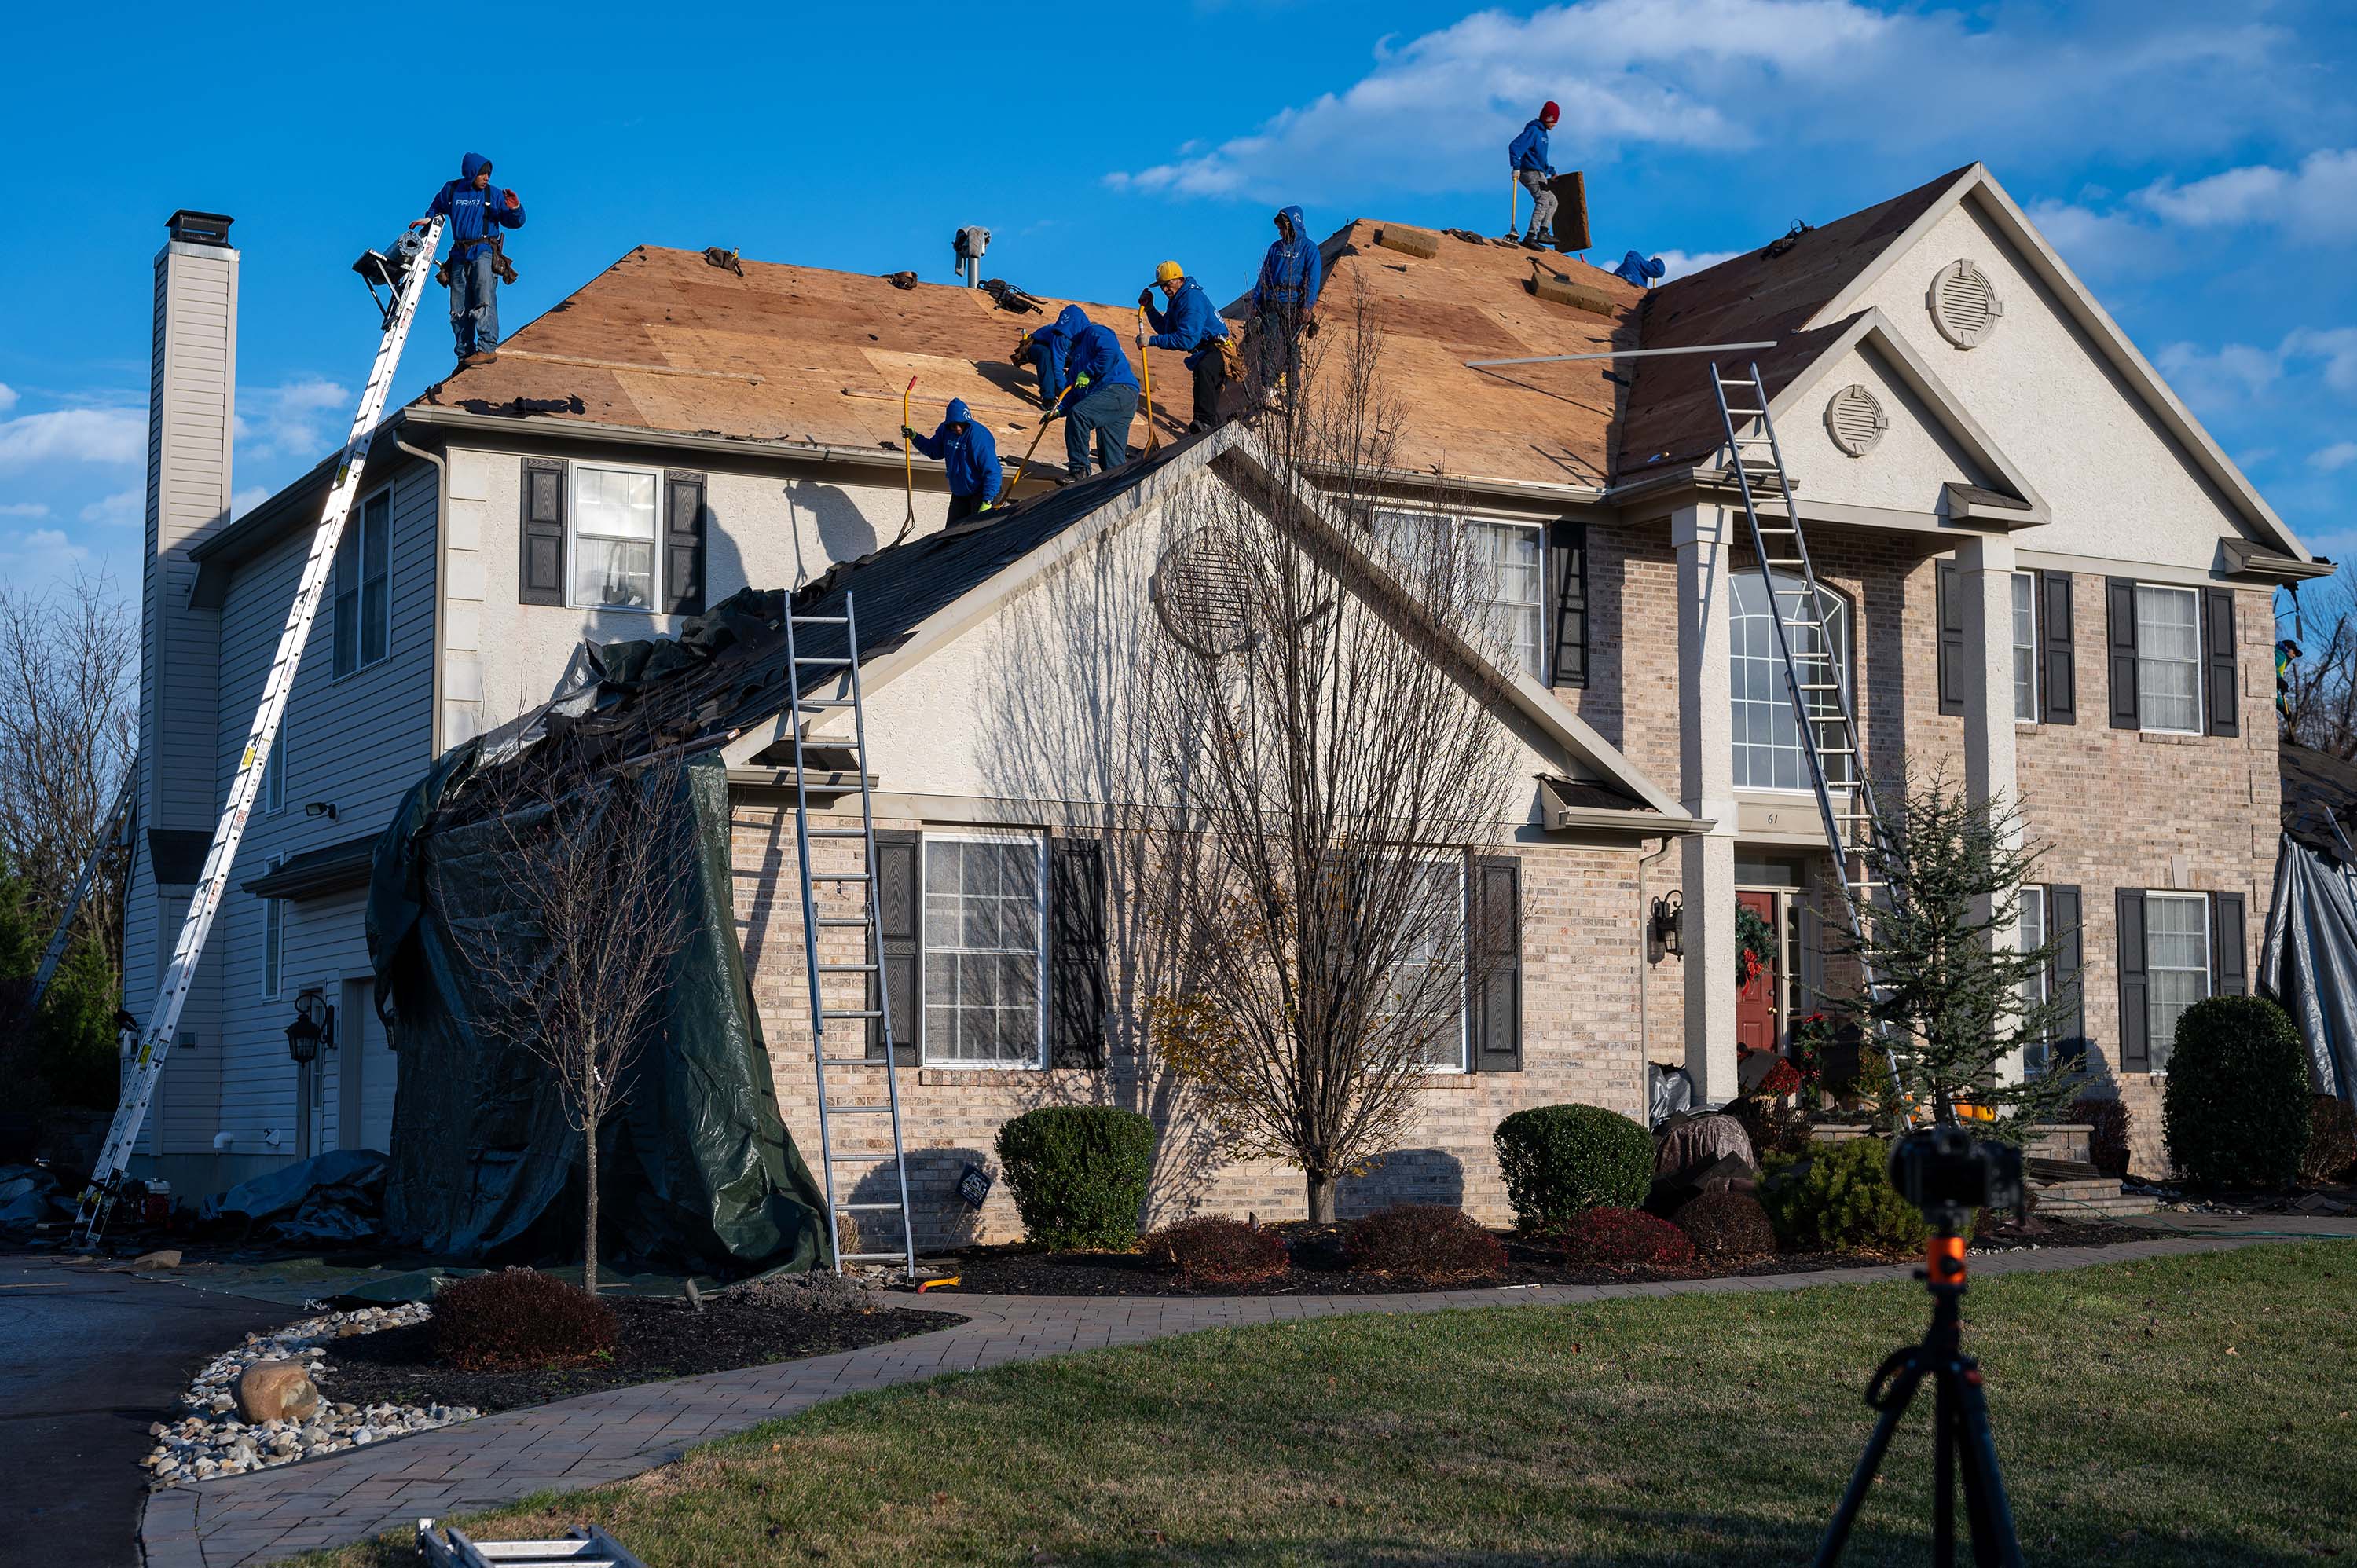 Warminster Roofing repair company - residential roofing contractors in Warminster, PA (large image)